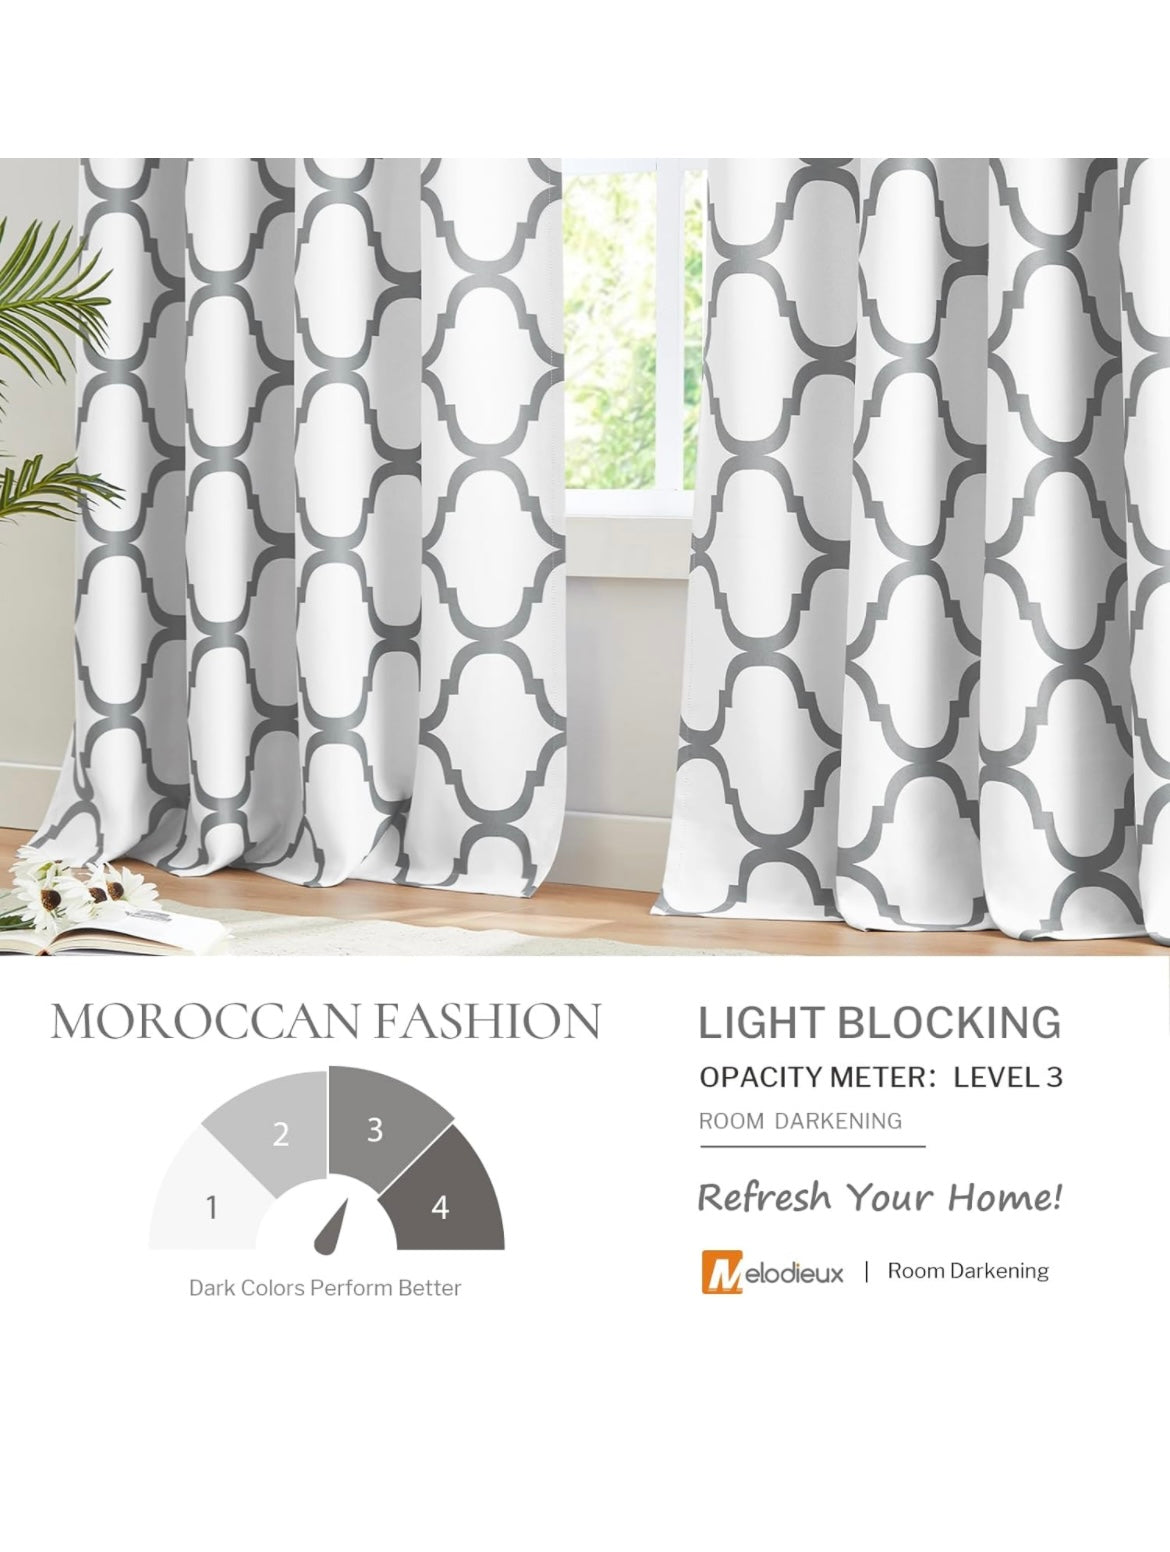 Melodieux Moroccan Printed Room Darkening Blackout Grommet Curtains for Living Room Bedroom, 52 by 84 Inch, Off White/Grey (2 Panels)